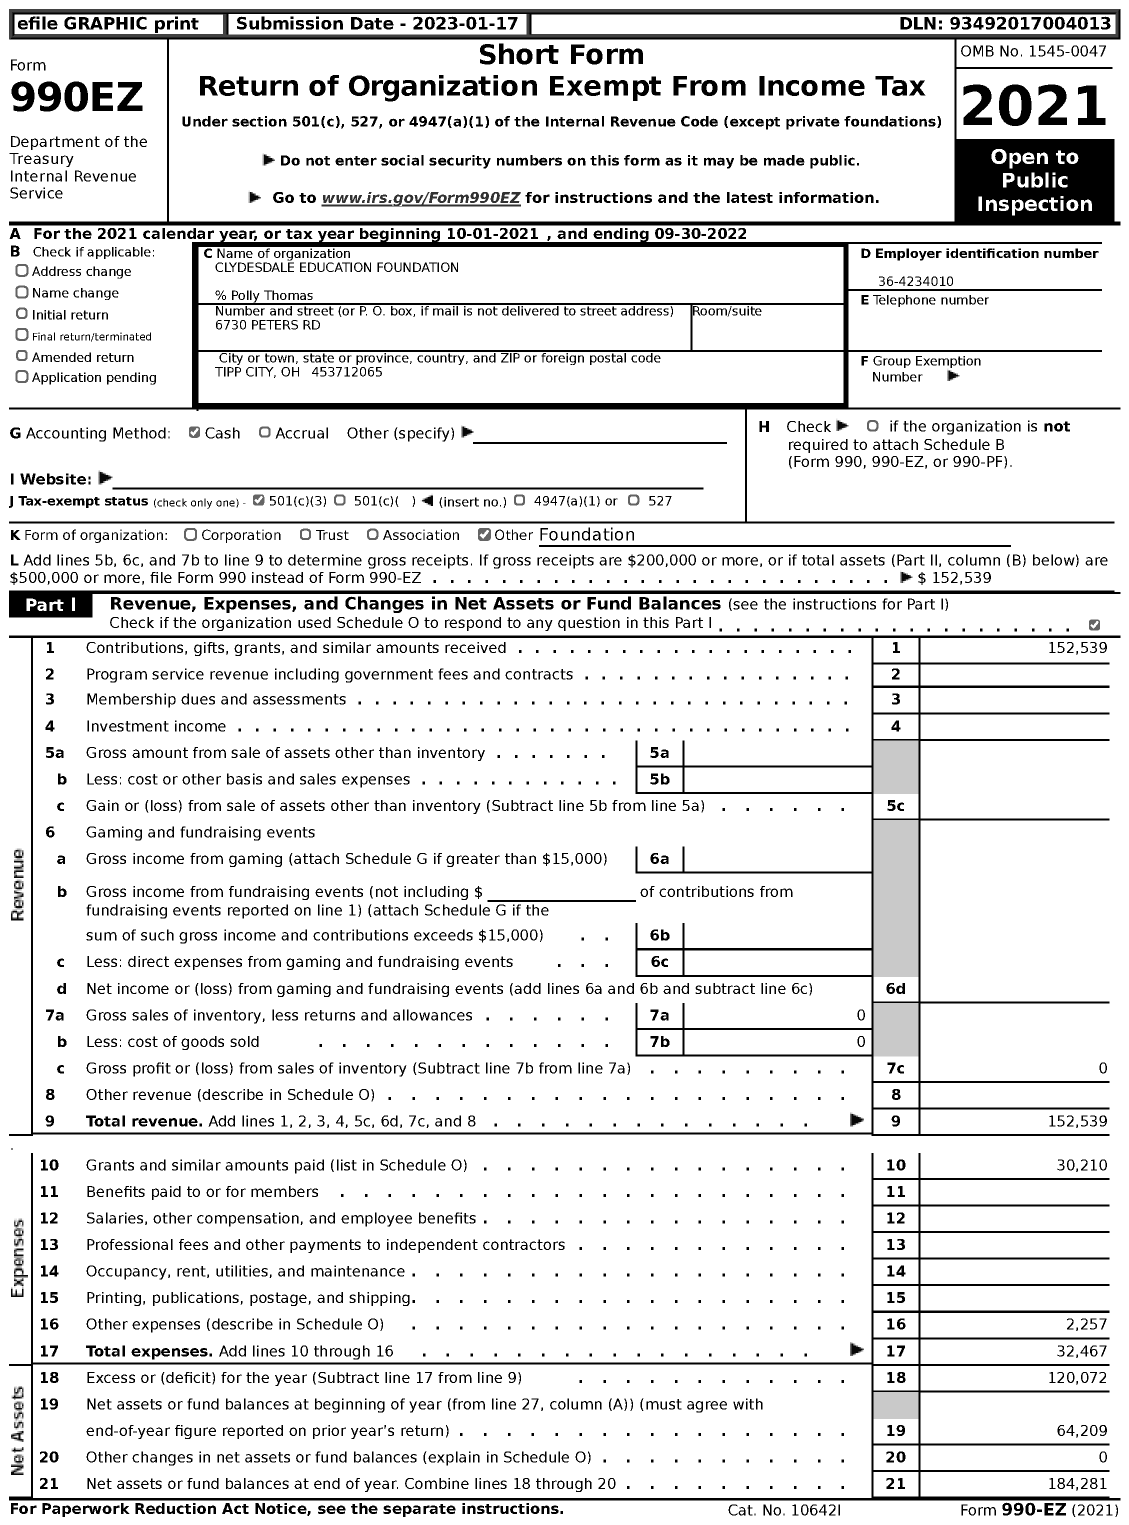 Image of first page of 2021 Form 990EZ for Clydesdale Education Foundation